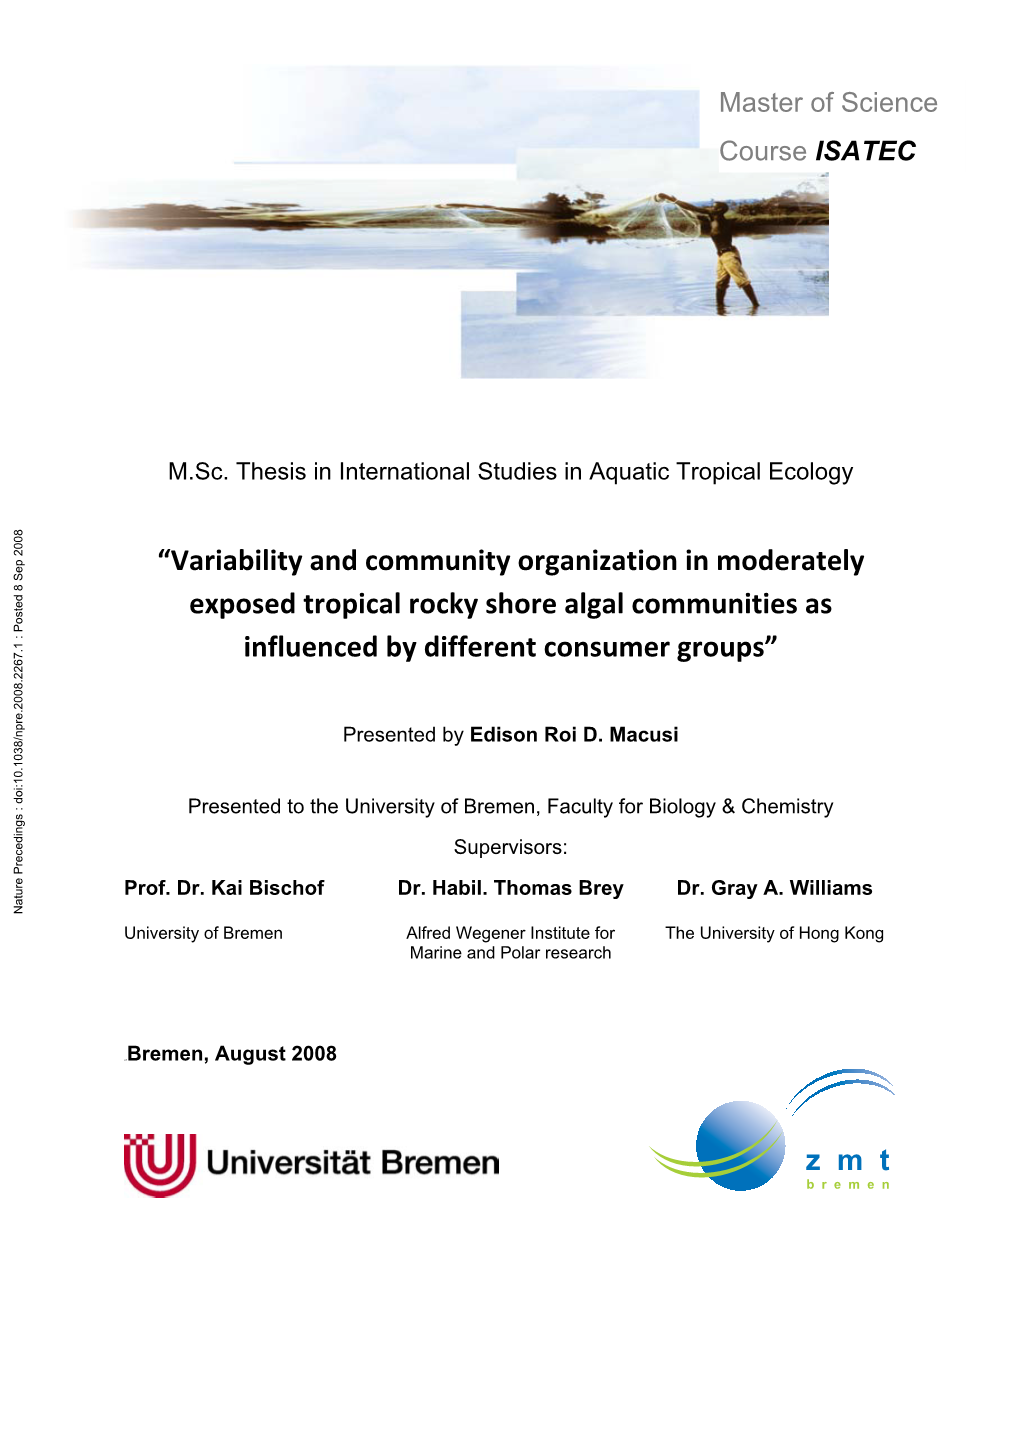 Variability and Community Organization in Moderately Exposed Tropical Rocky Shore Algal Communities As Influenced by Different Consumer Groups”